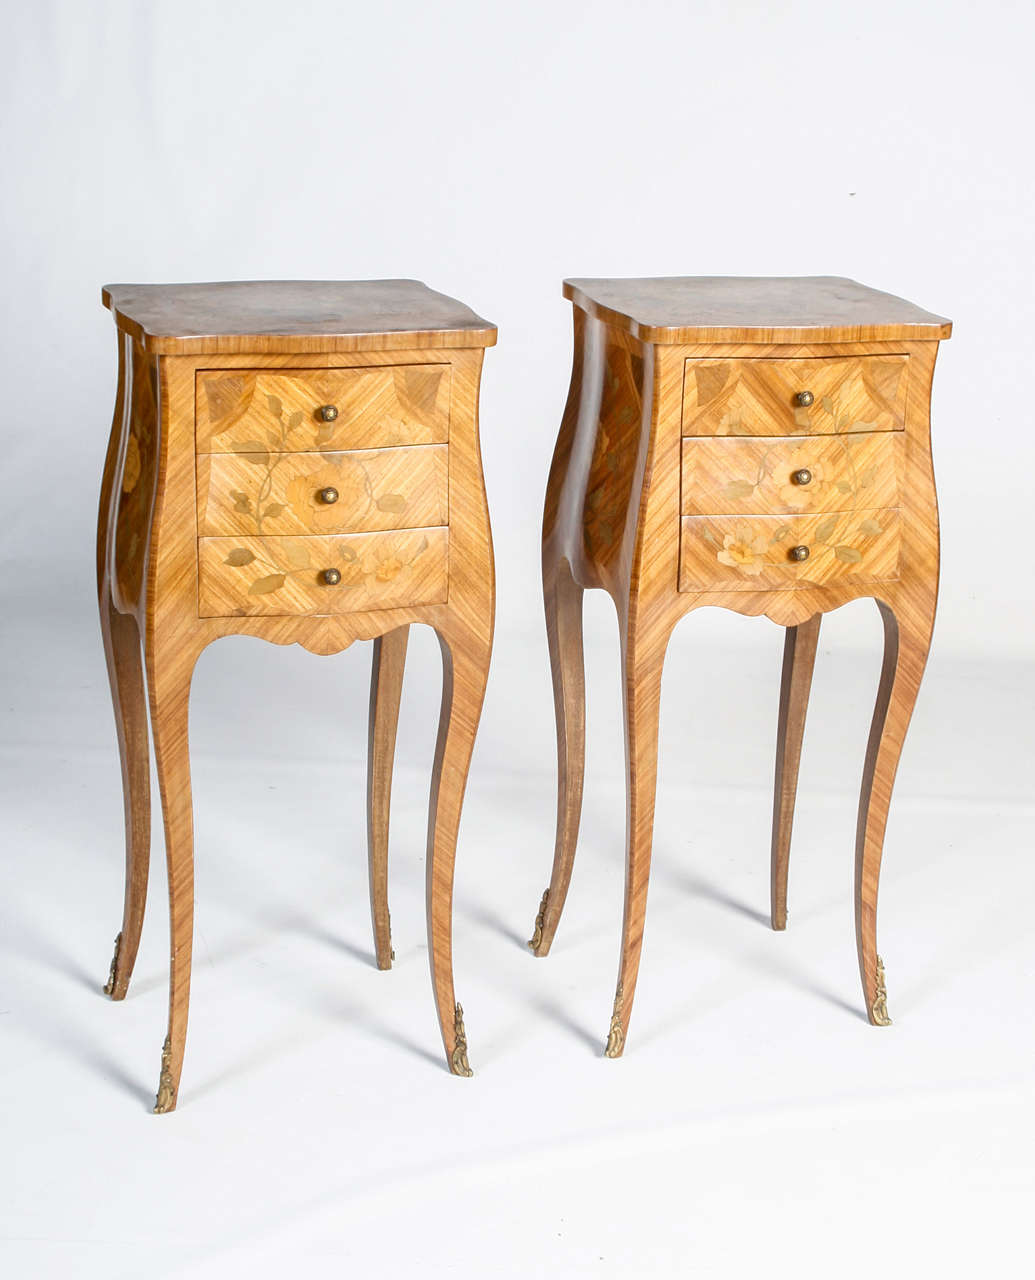 A superb pair of Louis XV Kingswood bedside tables with ormolu mounts. Intricite floral inlay and leaf patterns. Having three functional drawers. These are designed in a bombé shape.